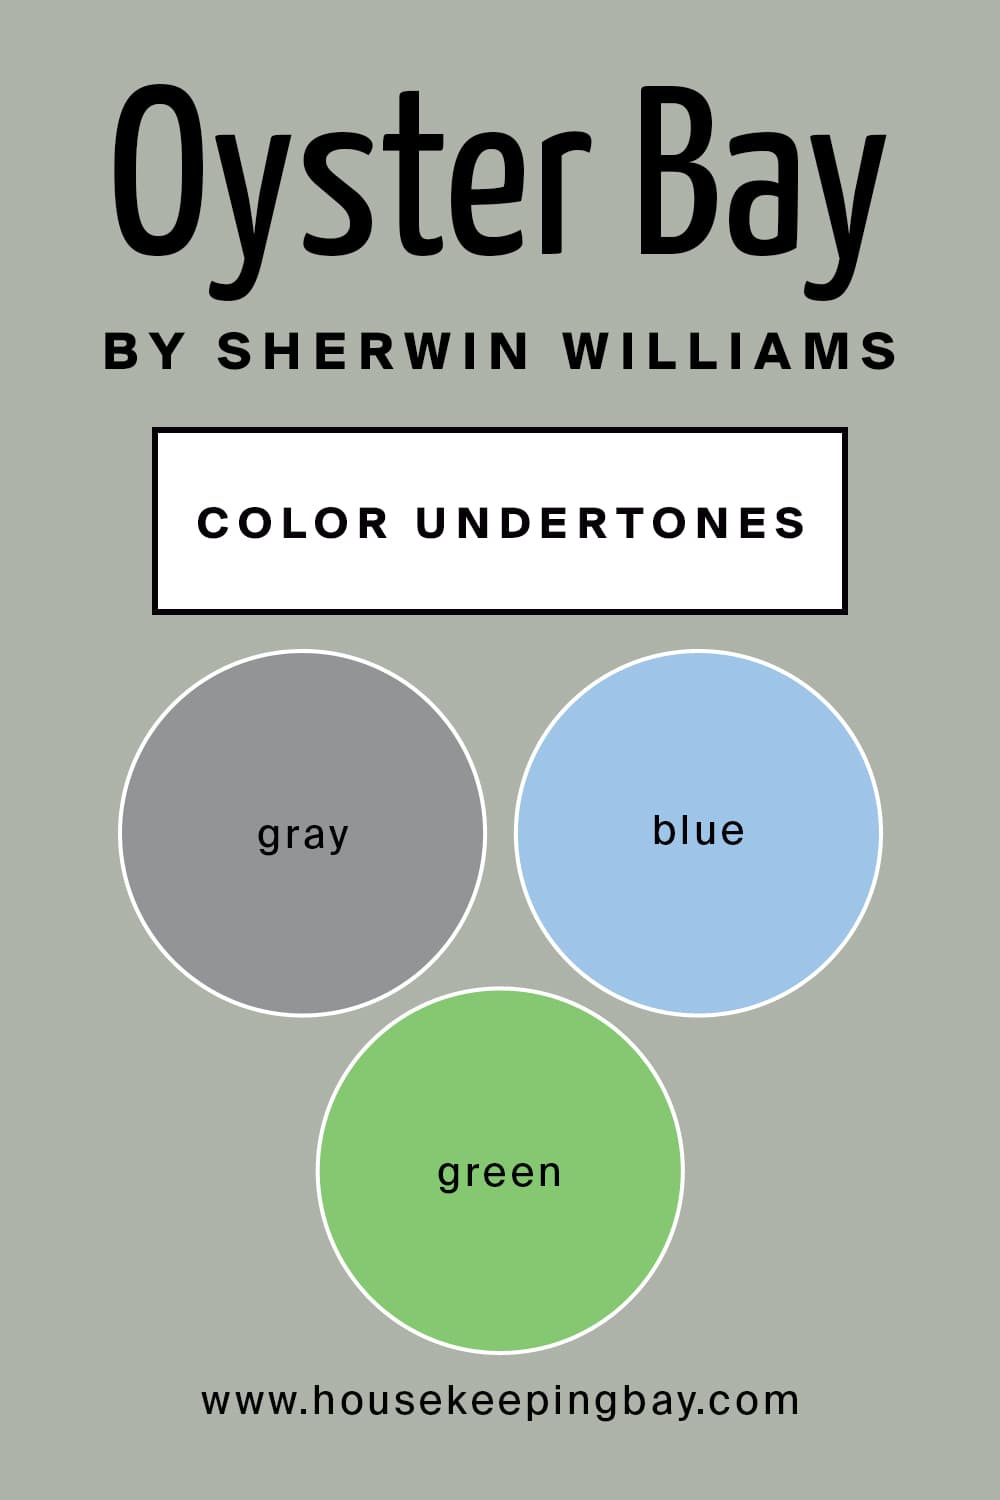 Oyster Bay by Sherwin Williams Color Undertones